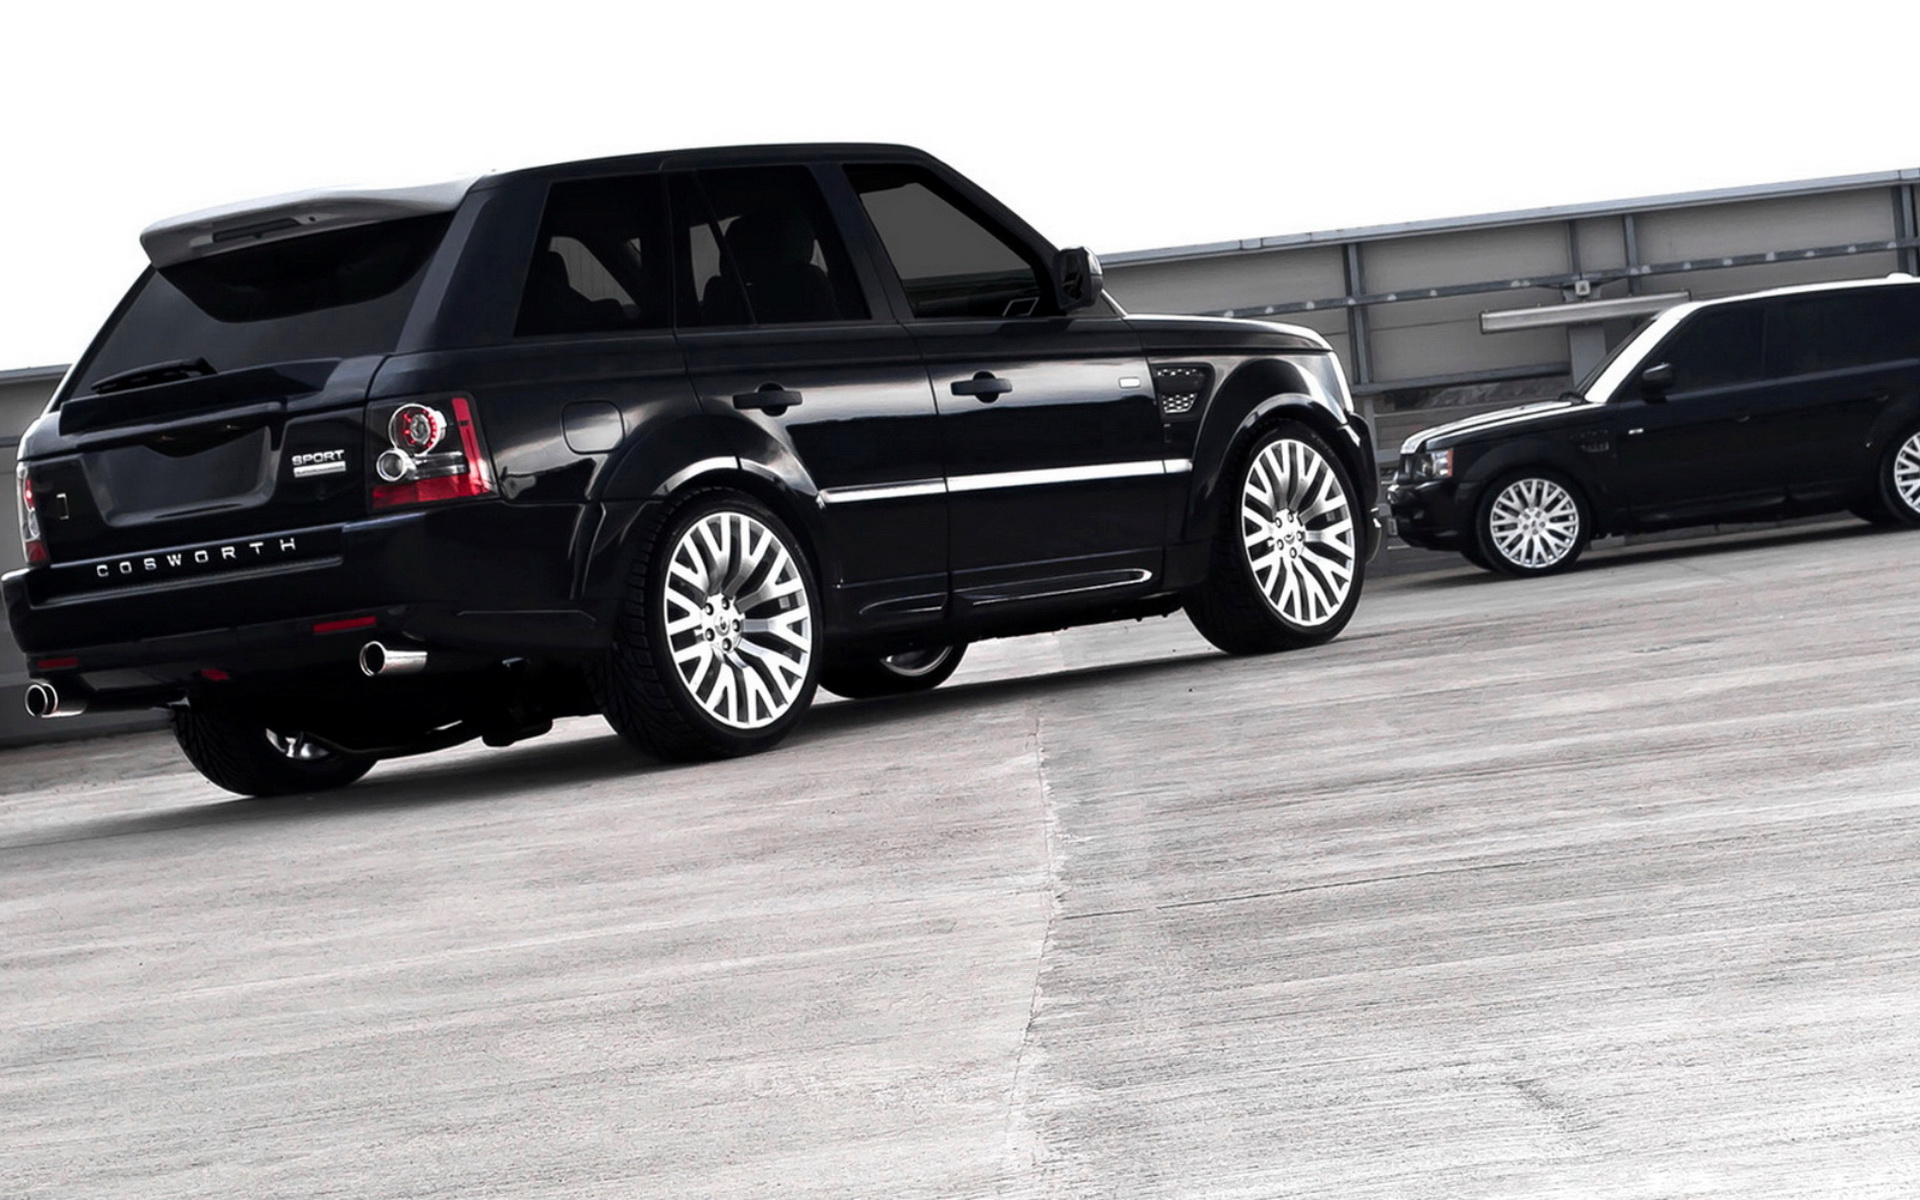 Range-Rover-Sport wallpapers and images - wallpapers, pictures, photos